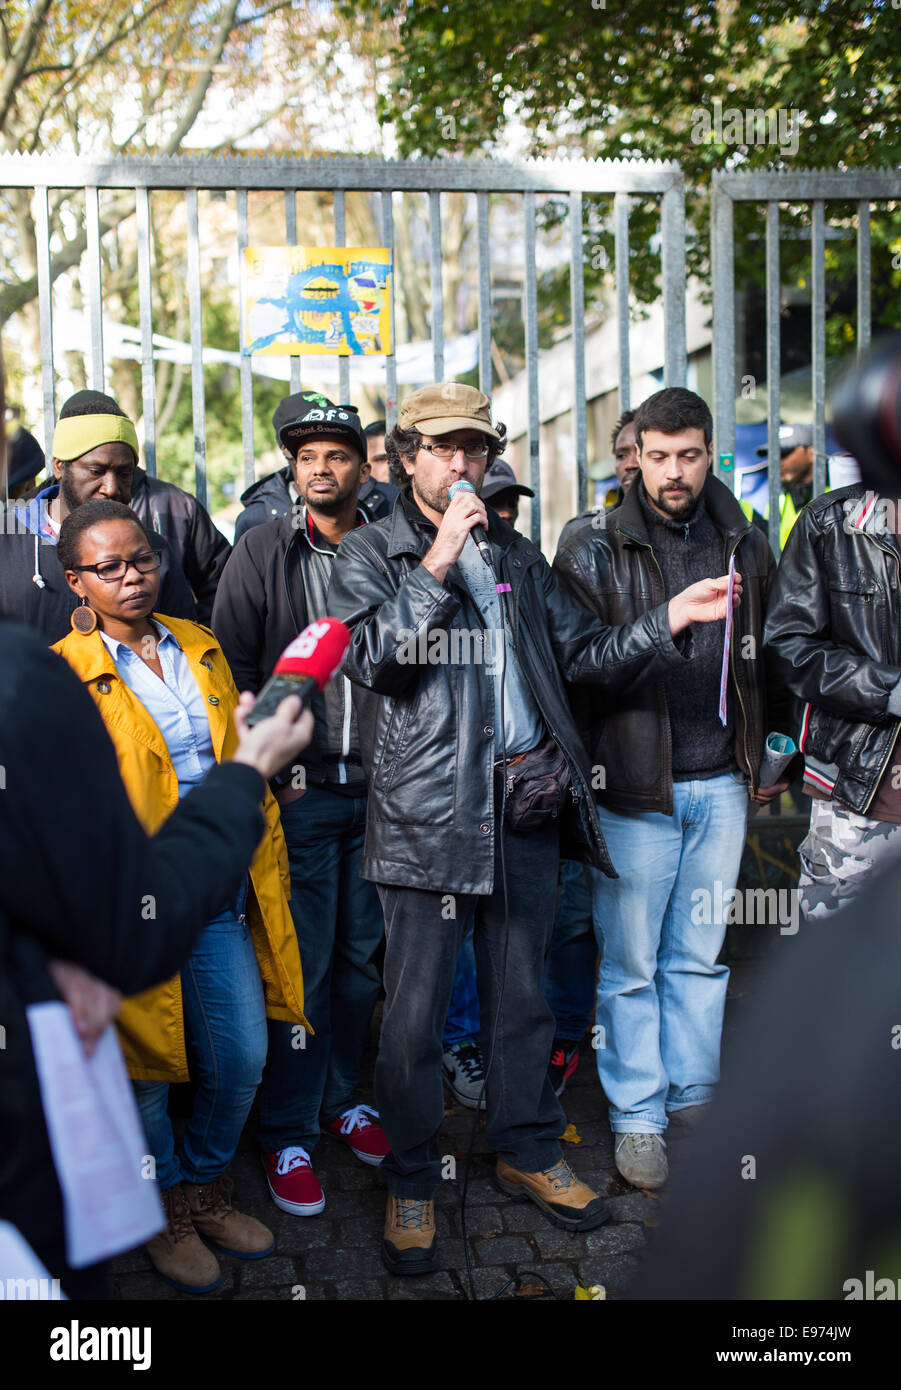 Berlin, Germany. 21st Oct, 2014. Activists and refugees speaking at a press conference in front of the Gerhart Hauptmann School in Berlin, Germany, 21 October 2014. Supporters demand that the district preserve refugee accommodations as well as the construction of a refugee cultural and social center. Credit:  dpa picture alliance/Alamy Live News Stock Photo